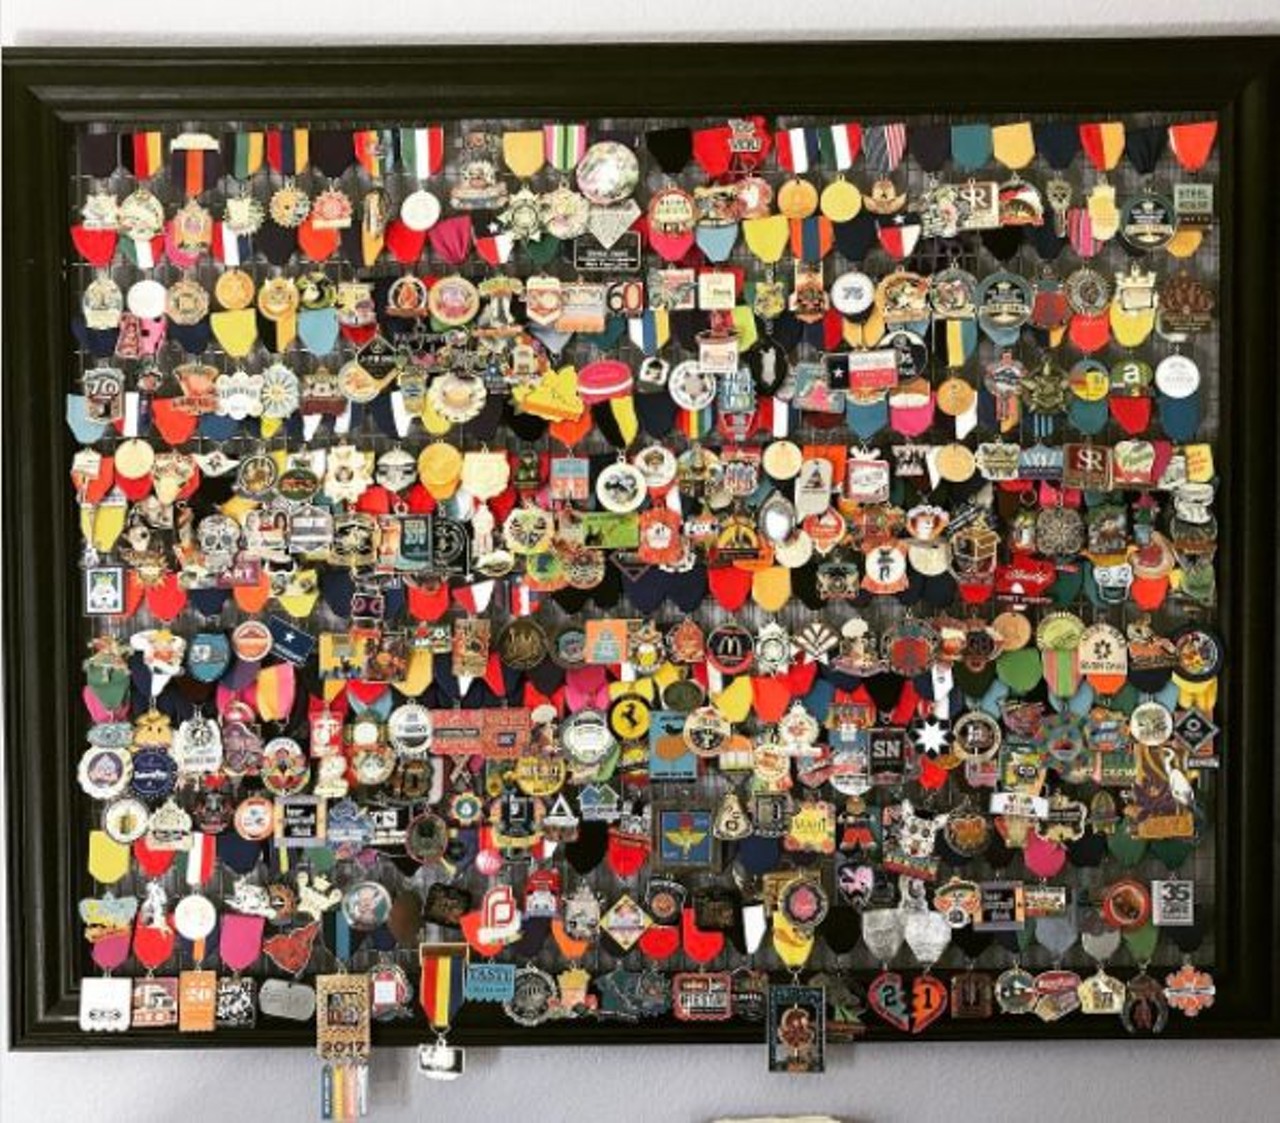 Fiesta medals are treasures
Because this wouldn&#146;t make sense anywhere else.
Photo via Instagram, sdgthieme